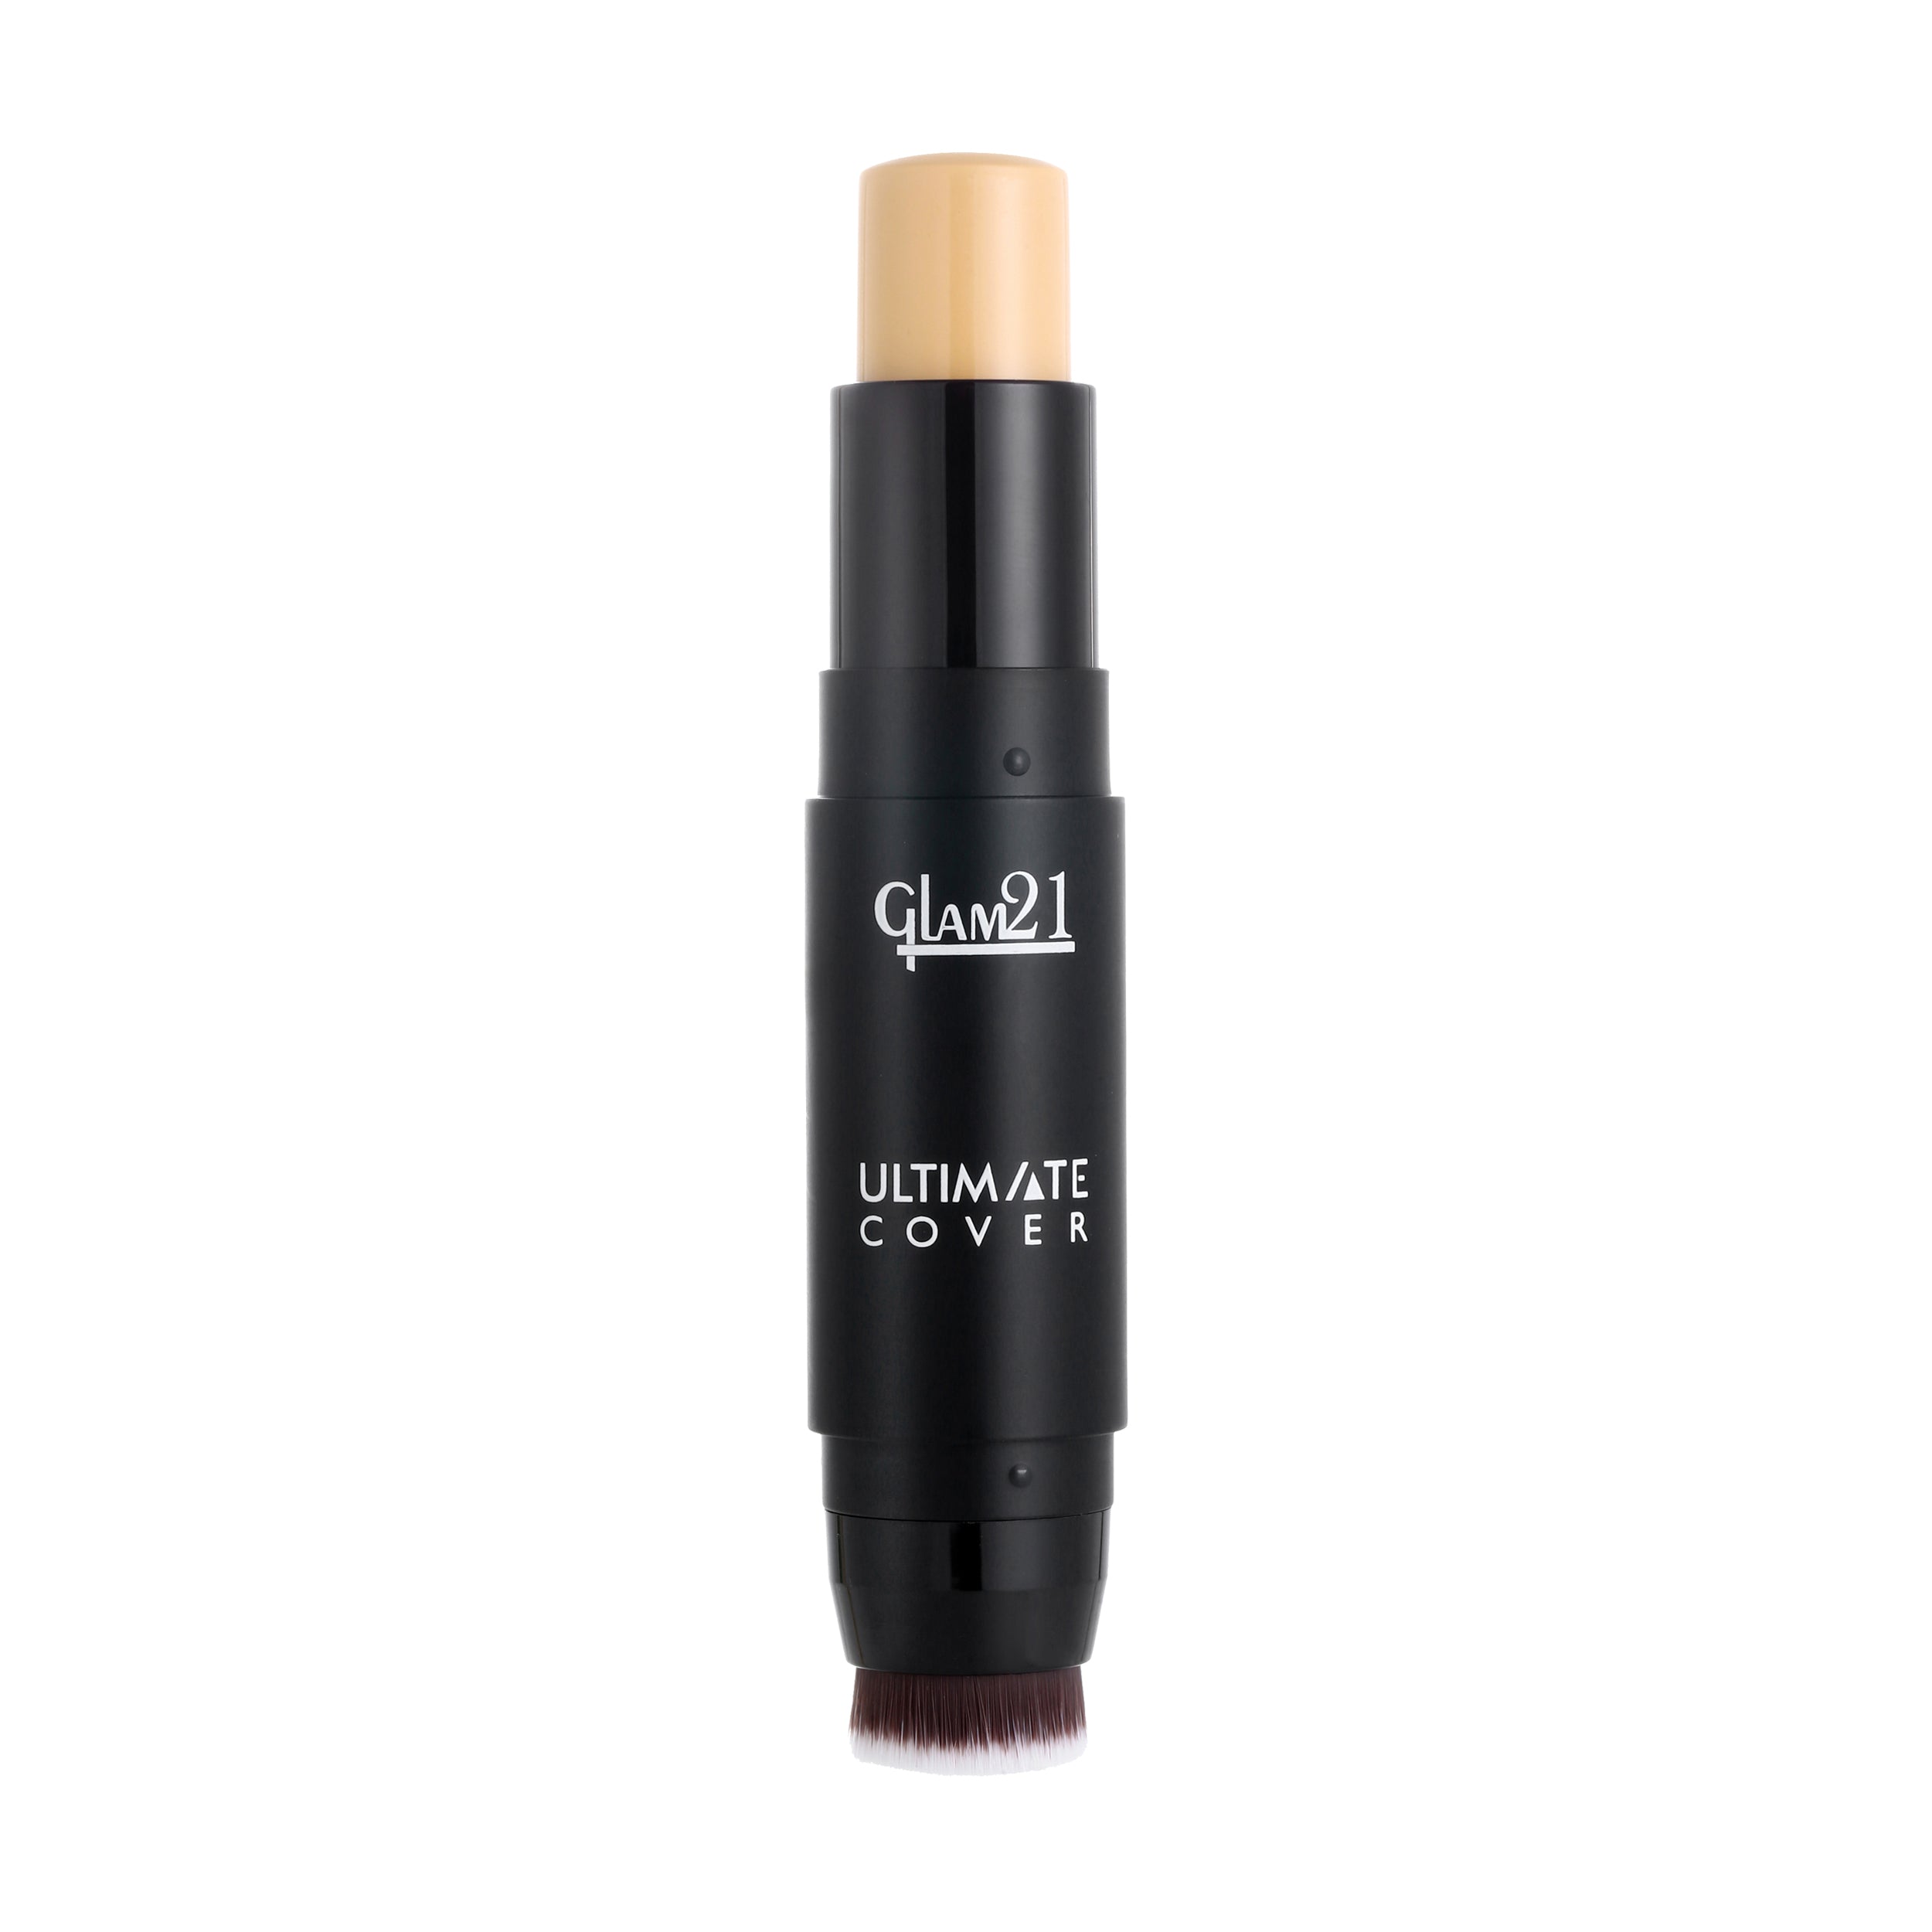 Glam21 Ultimate Cover Foundation Stick Easy to Blend & Gives Matte Finish upto 12 Hours Foundation (04-Honey, 8 g)